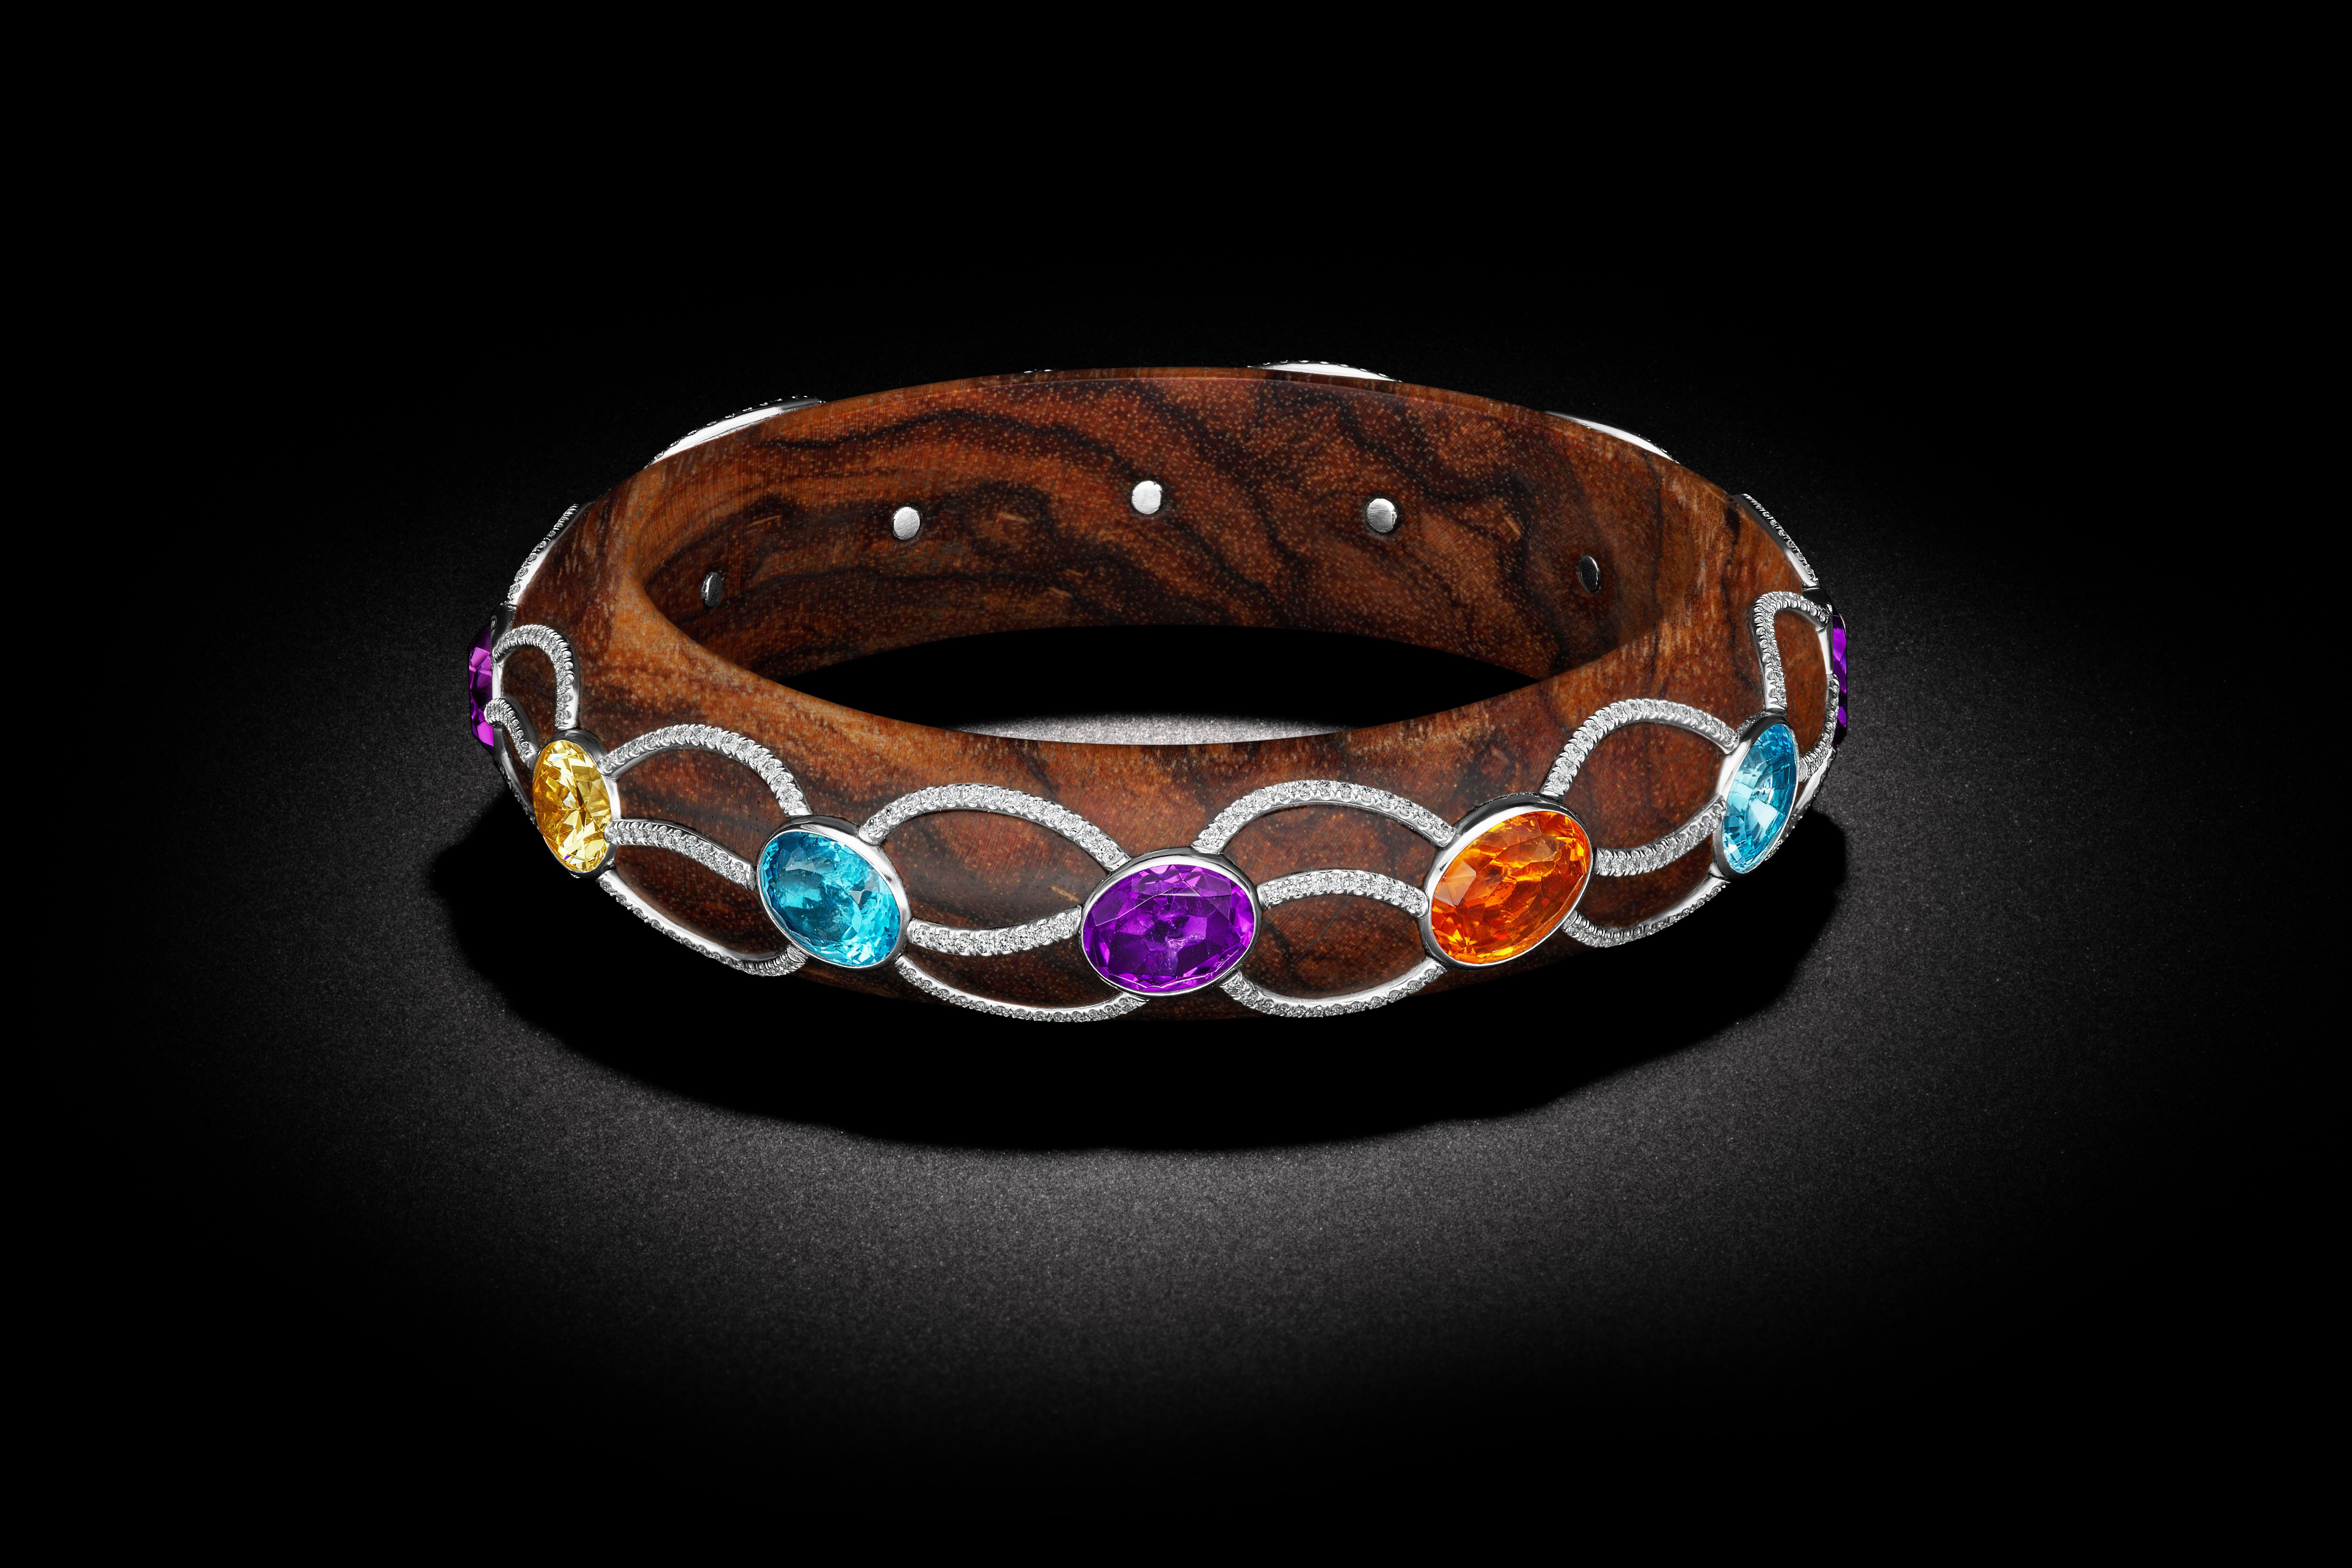 One of kind - wooden bangle. This Begem is covered with multi-colored gems weighing 3.70 carats interlaced in an intrinsic design of 2 carats of pave' diamonds all set in 38.65 grams of Platinum. 



